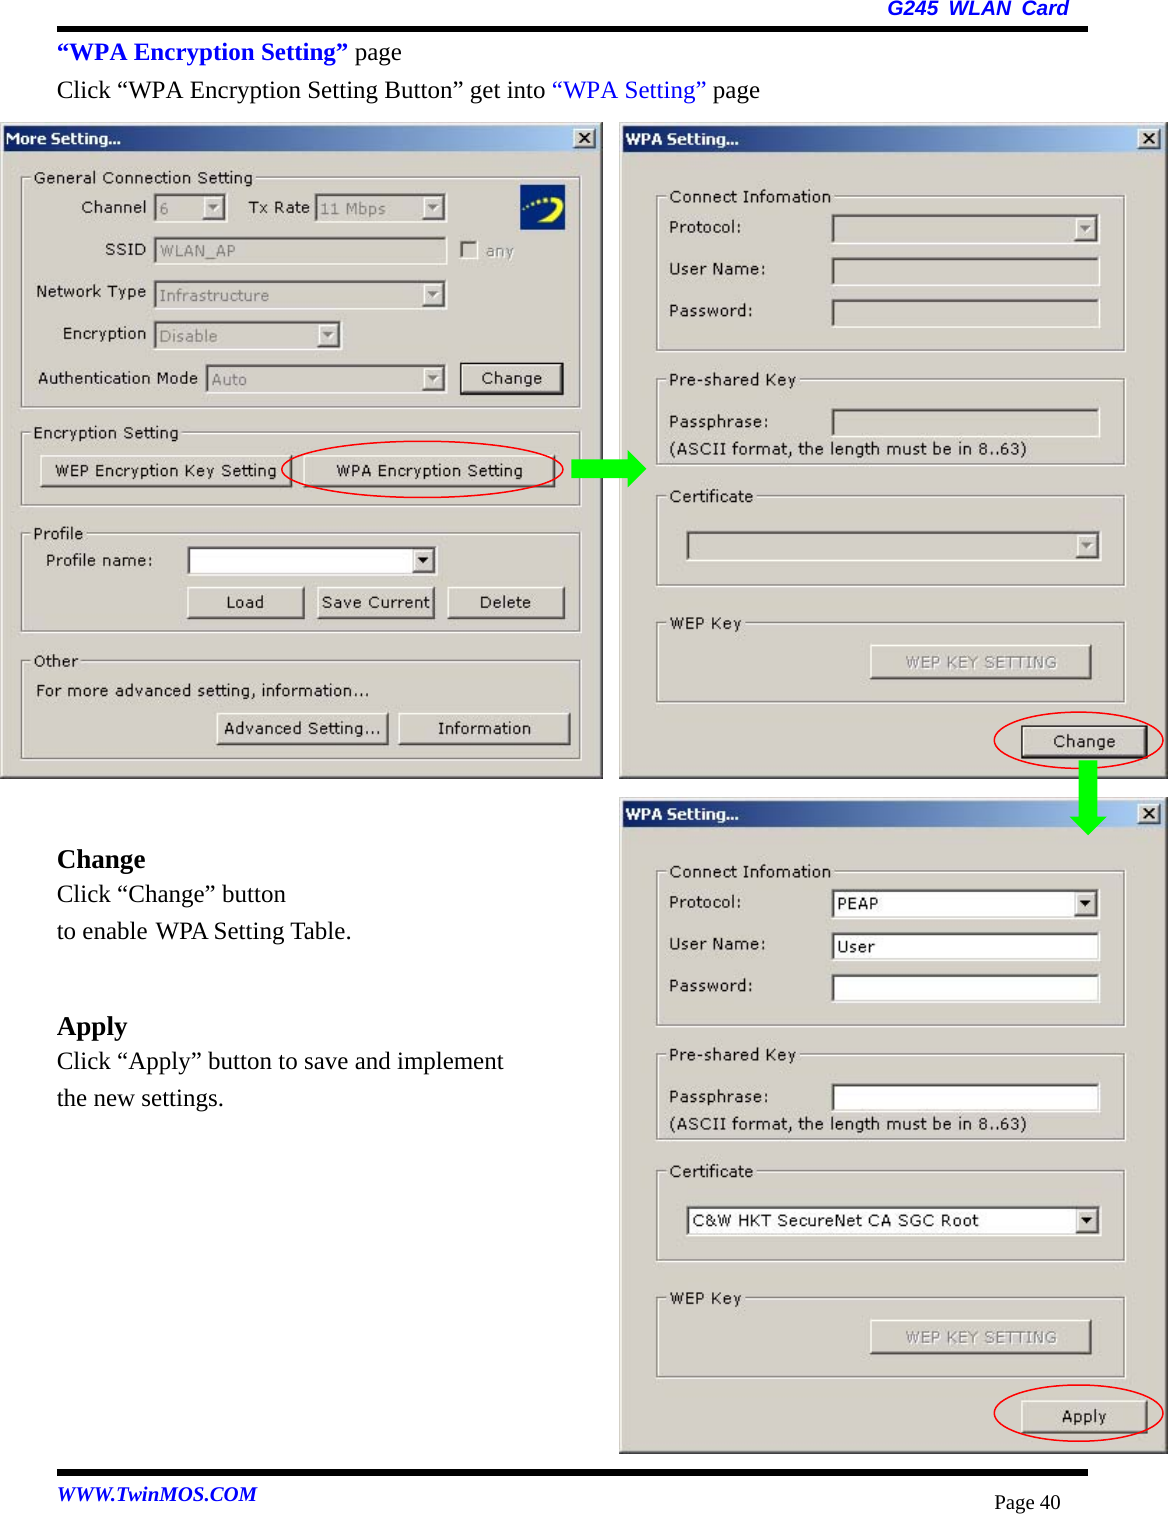   G245 WLAN Card WWW.TwinMOS.COM  Page 40“WPA Encryption Setting” page Click “WPA Encryption Setting Button” get into “WPA Setting” page                    Change Click “Change” button   to enable WPA Setting Table.  Apply Click “Apply” button to save and implement   the new settings.          